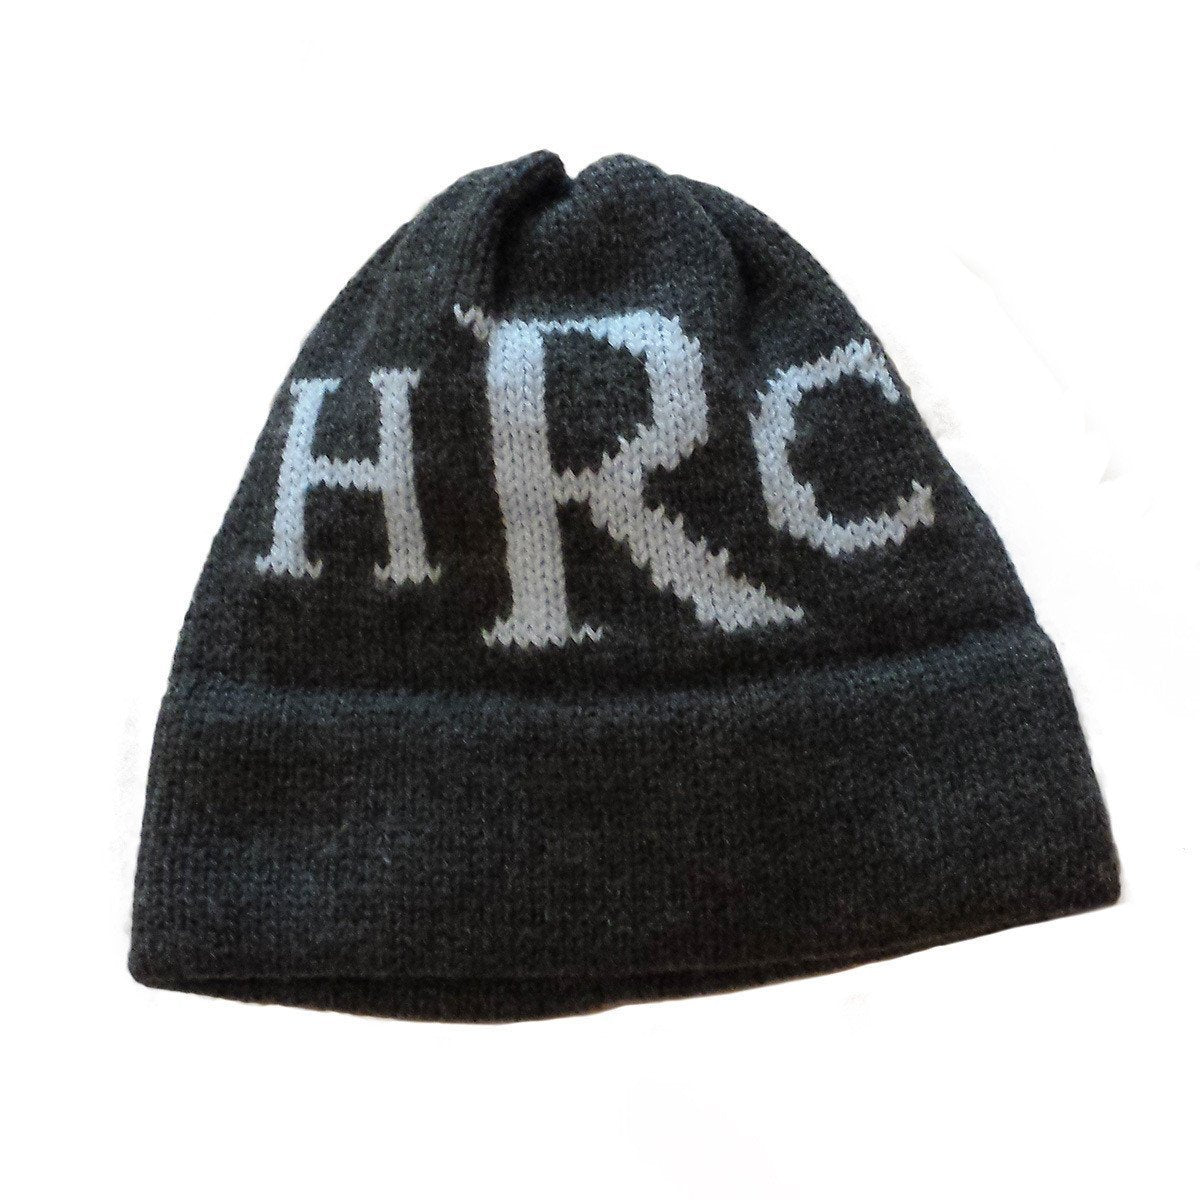 Monogram Personalized Knit Hat-Hats-Jack and Jill Boutique